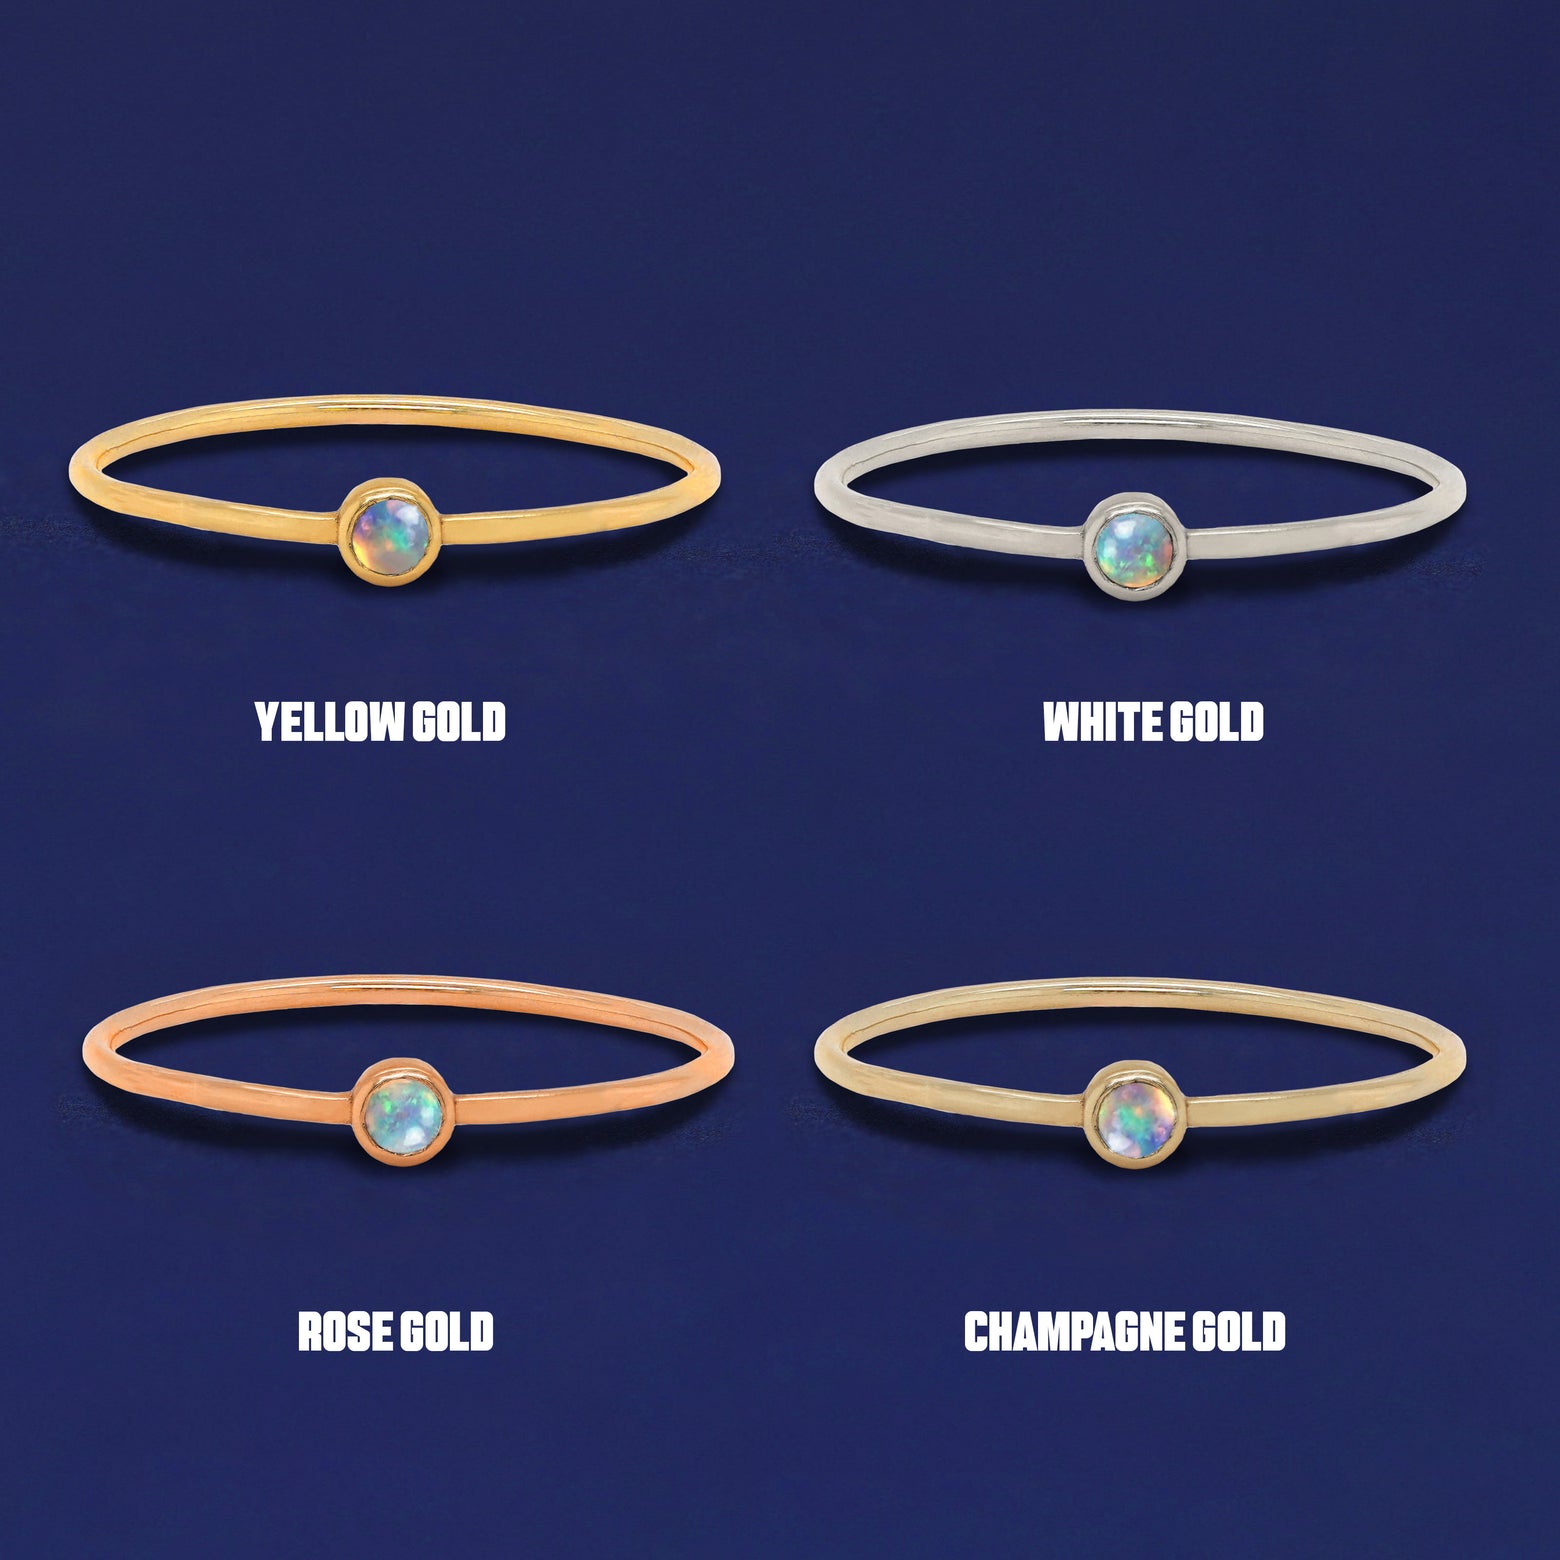 Four versions of the Opal Ring shown in options of yellow, white, rose and champagne gold